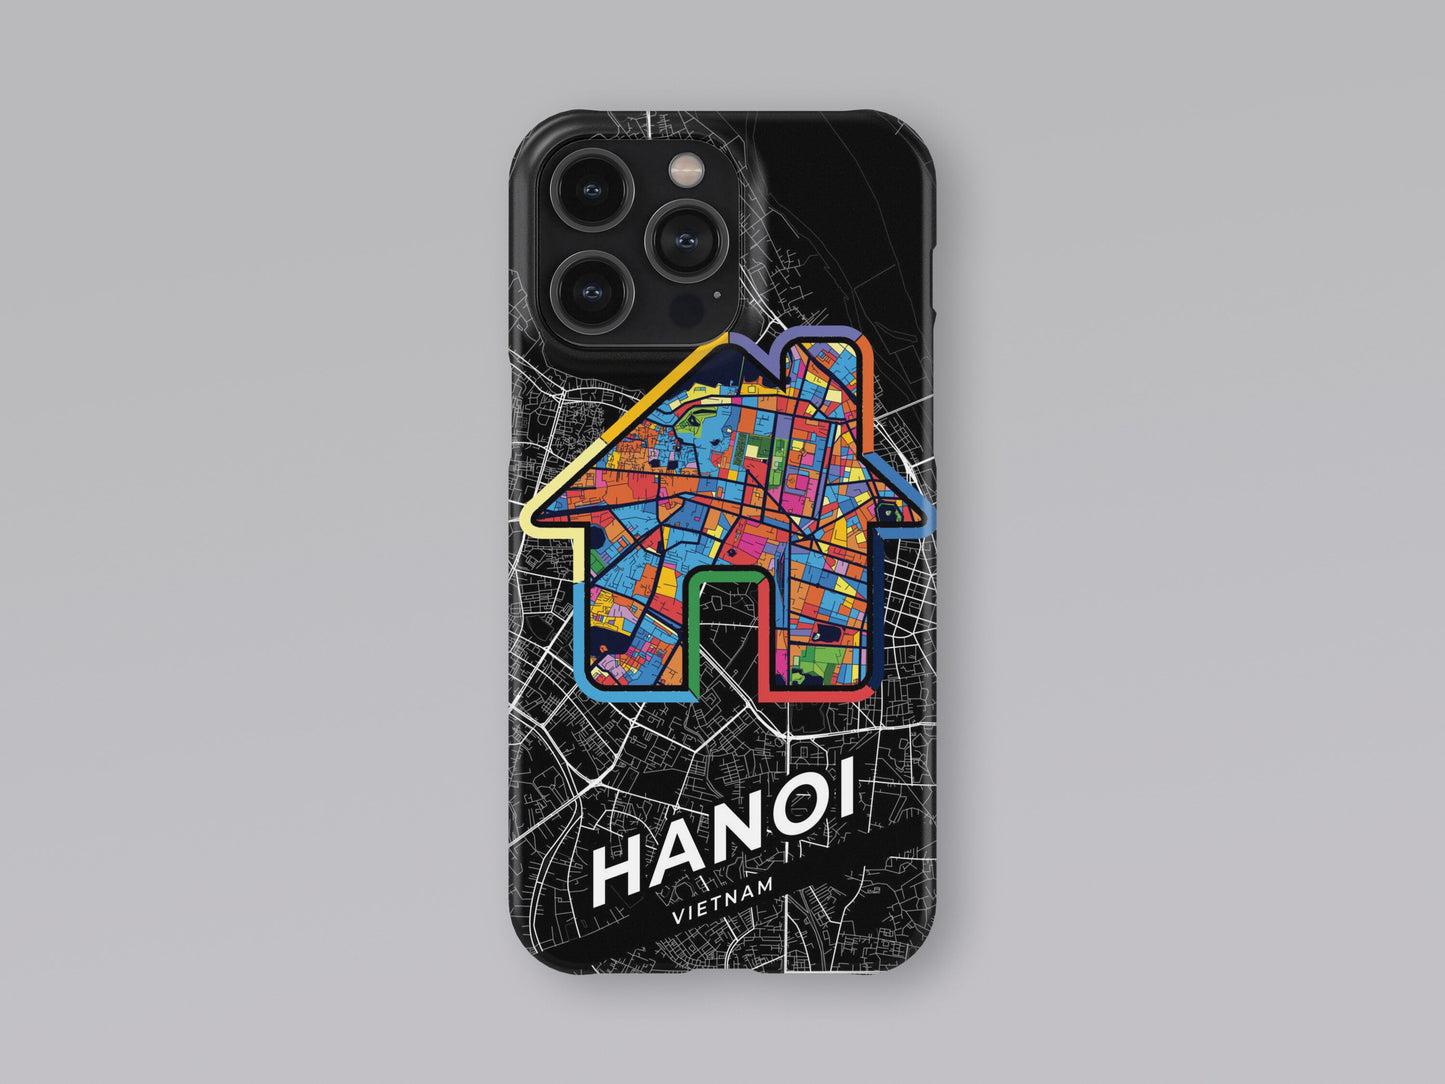 Hanoi Vietnam slim phone case with colorful icon. Birthday, wedding or housewarming gift. Couple match cases. 3